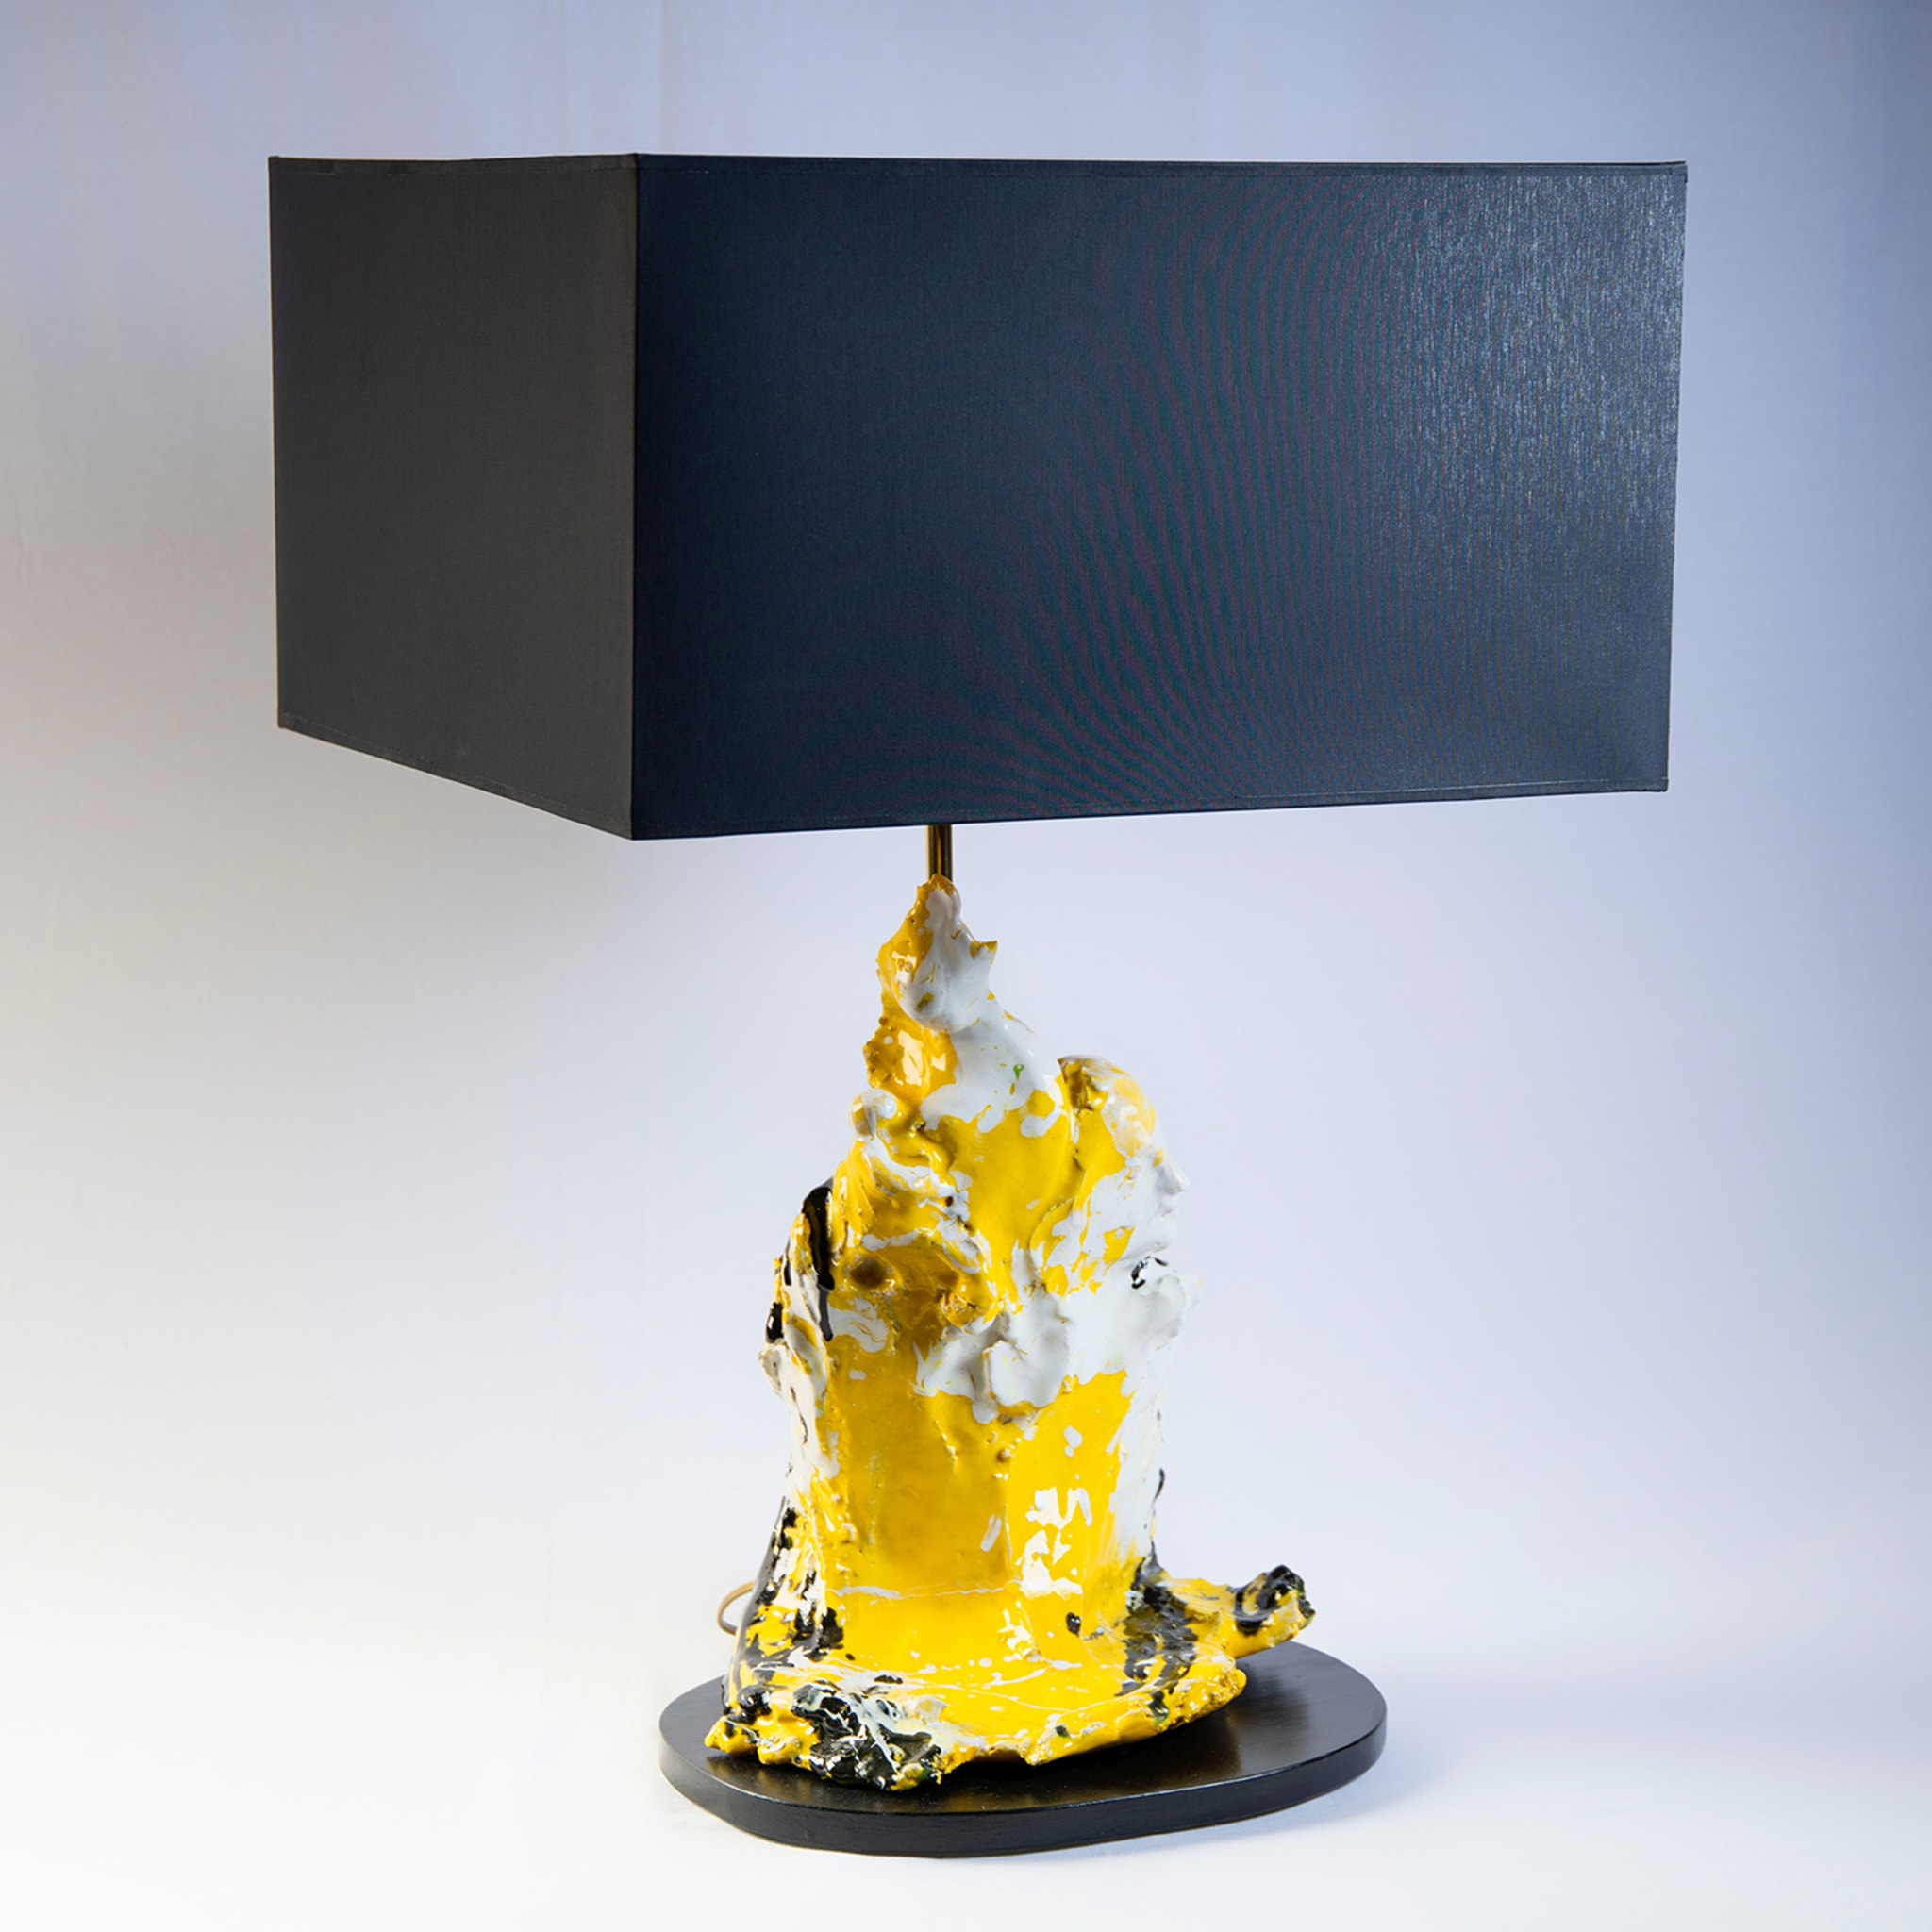 Cascata D'Amore White & Yellow Table Lamp - Alternative view 4